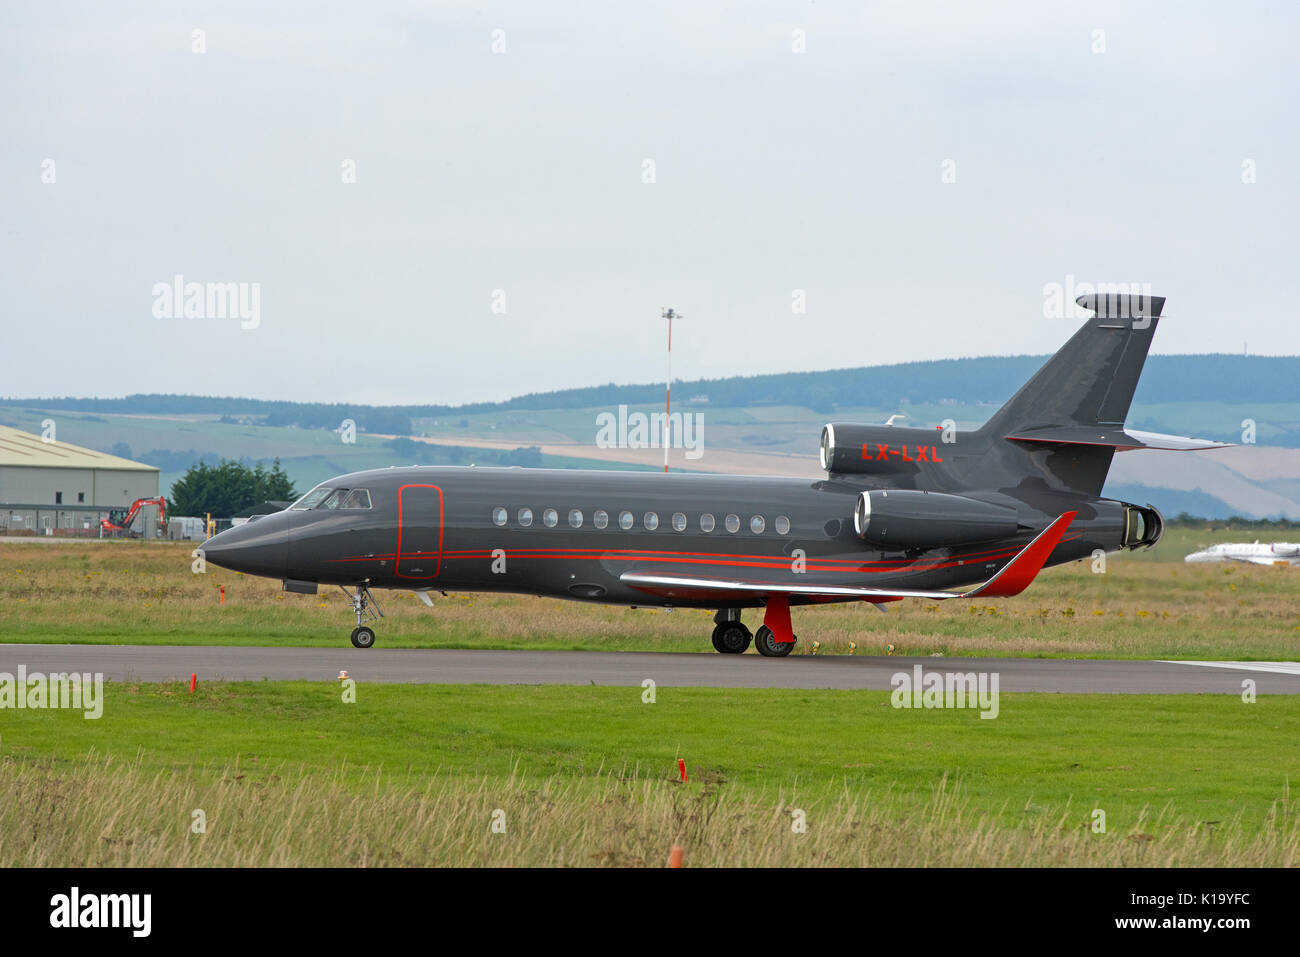 French Built Dassault 3 engined Business luxury jet aircraft at Invernees airport in the Scottish Highlands. Stock Photo